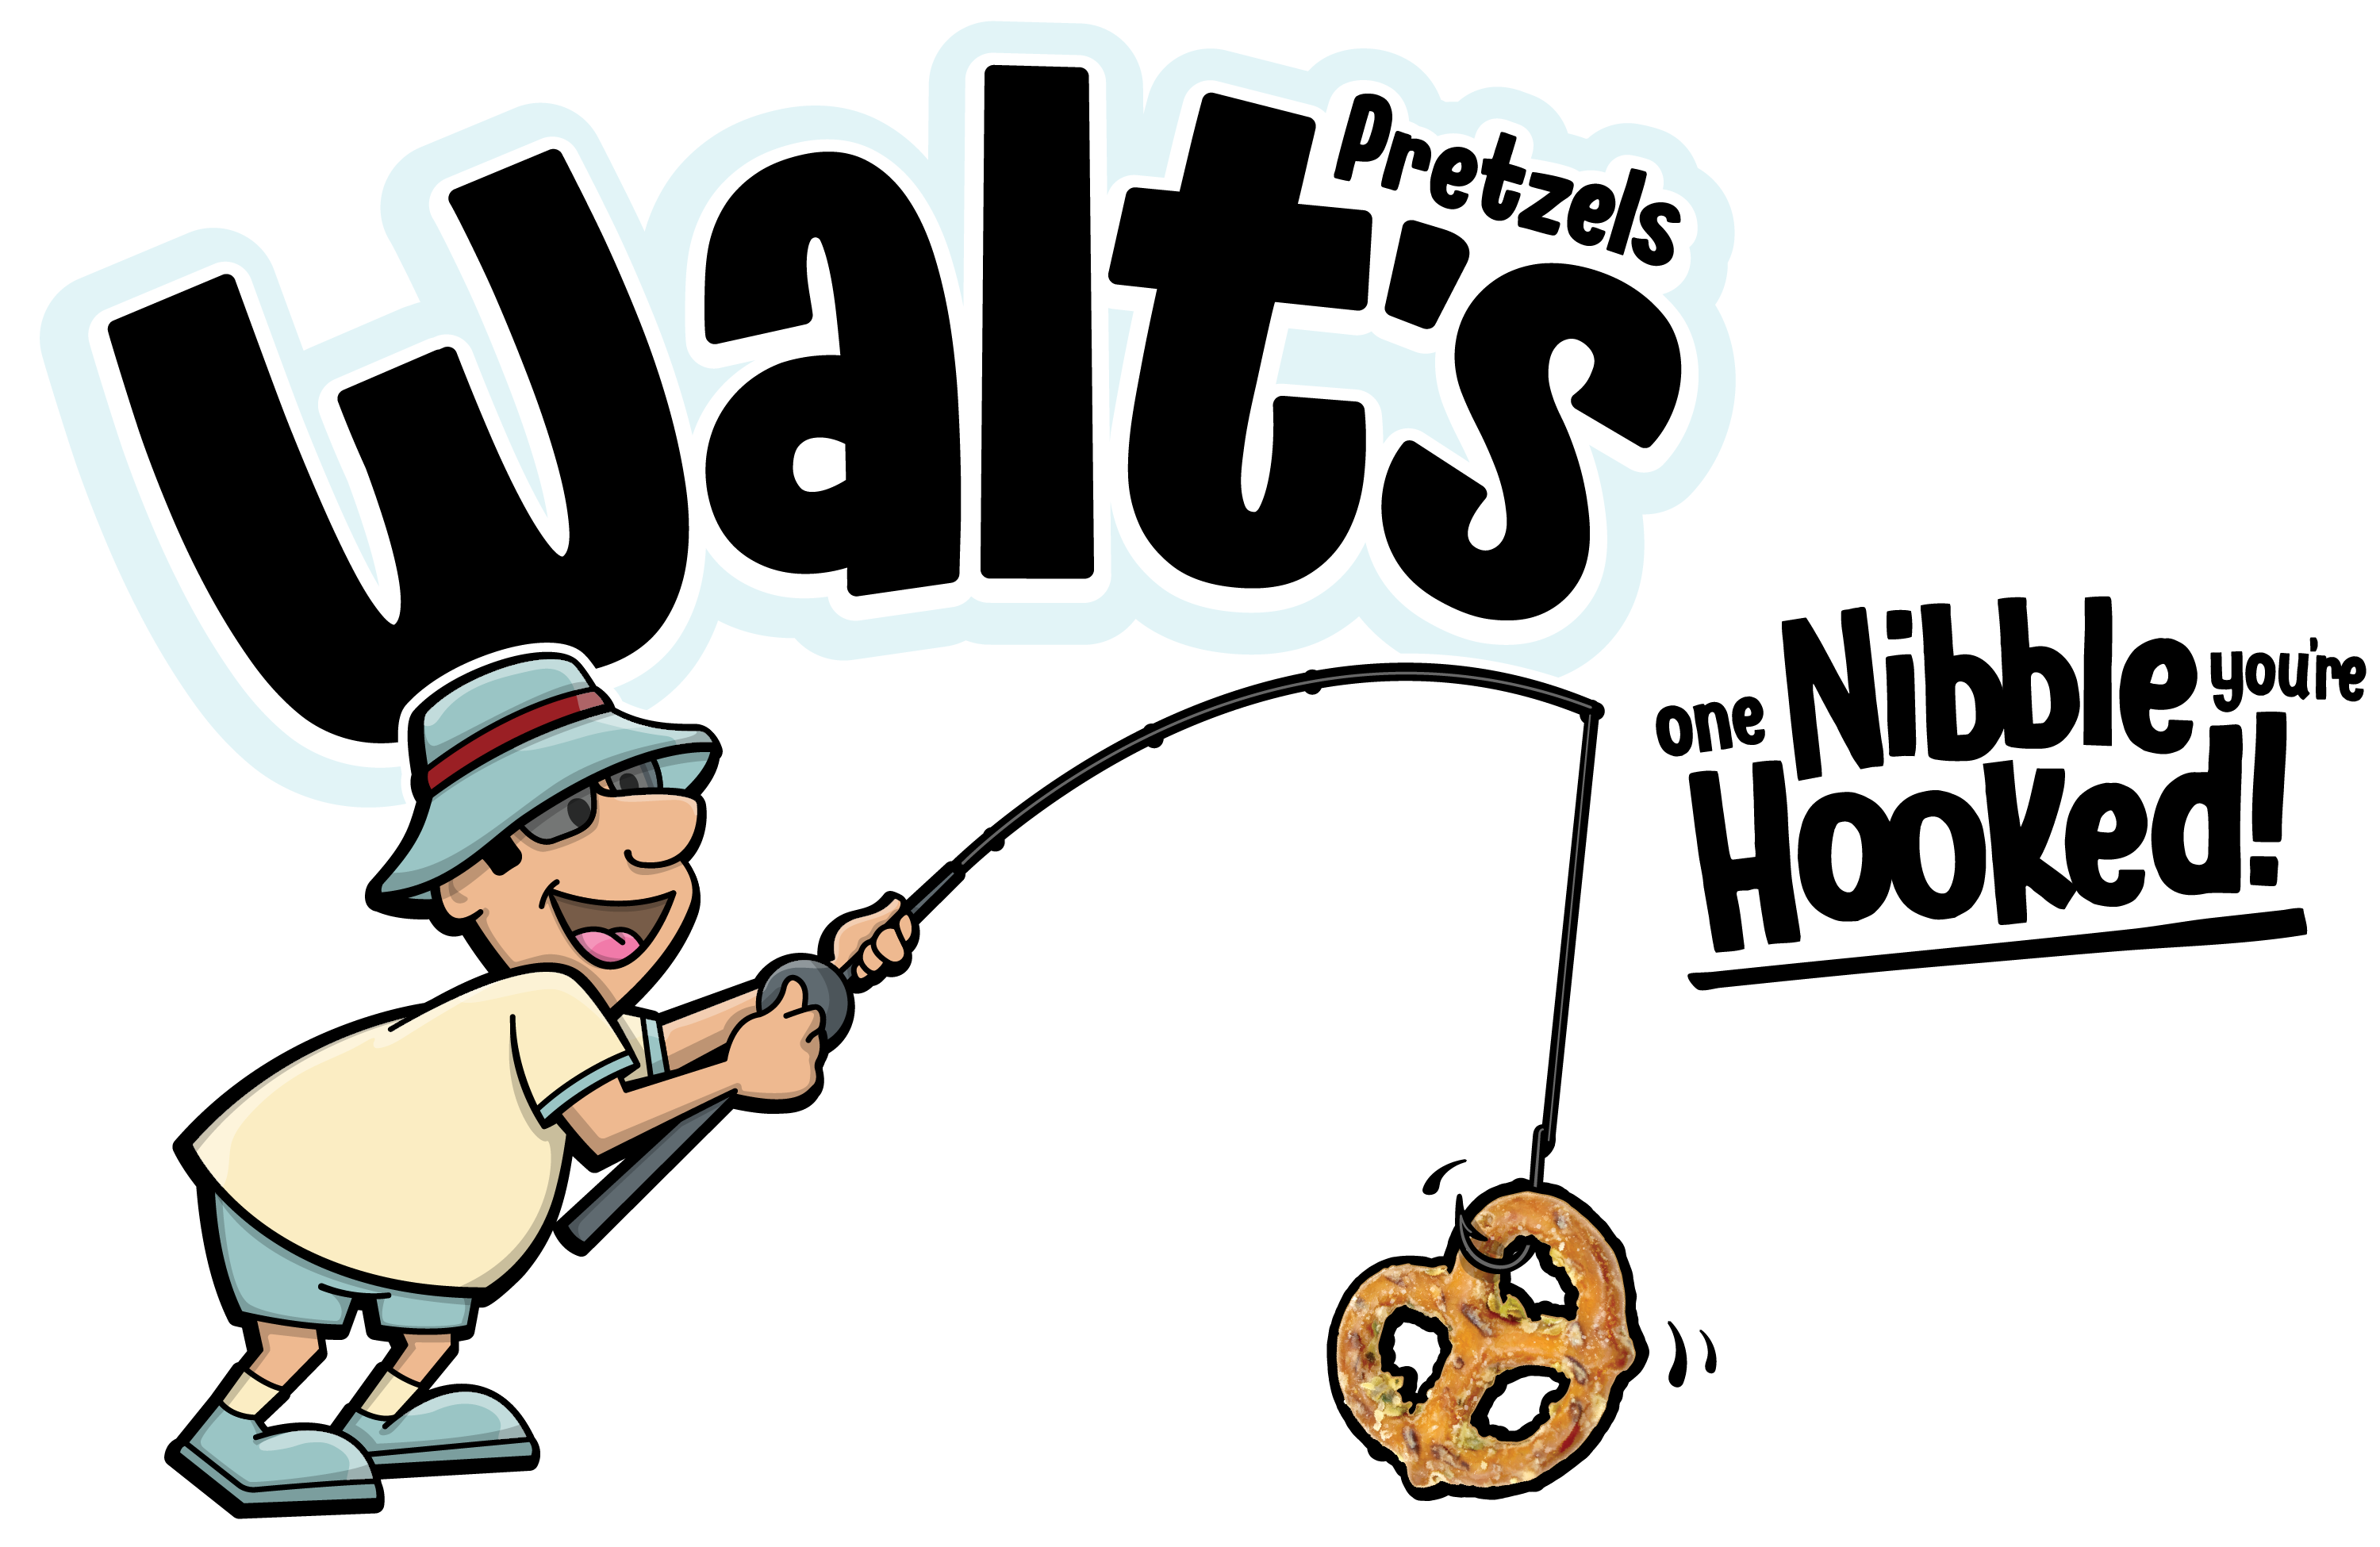 Walt’s Pretzels. One Nibble You’re Hooked!